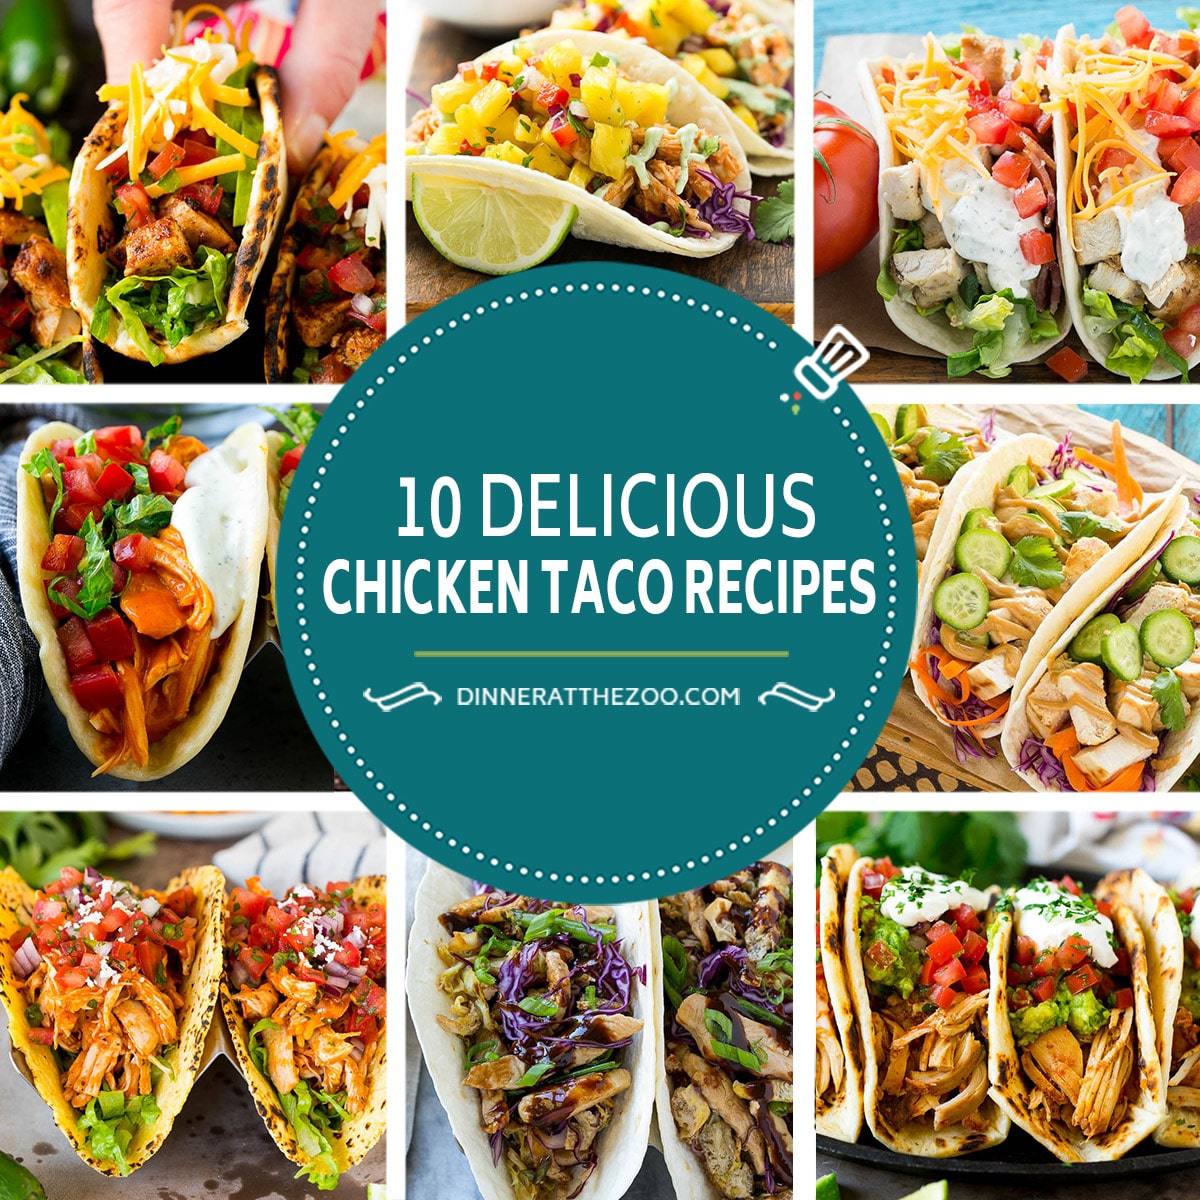 A collection of delicious chicken taco recipes including chicken tinga and slow cooker options.